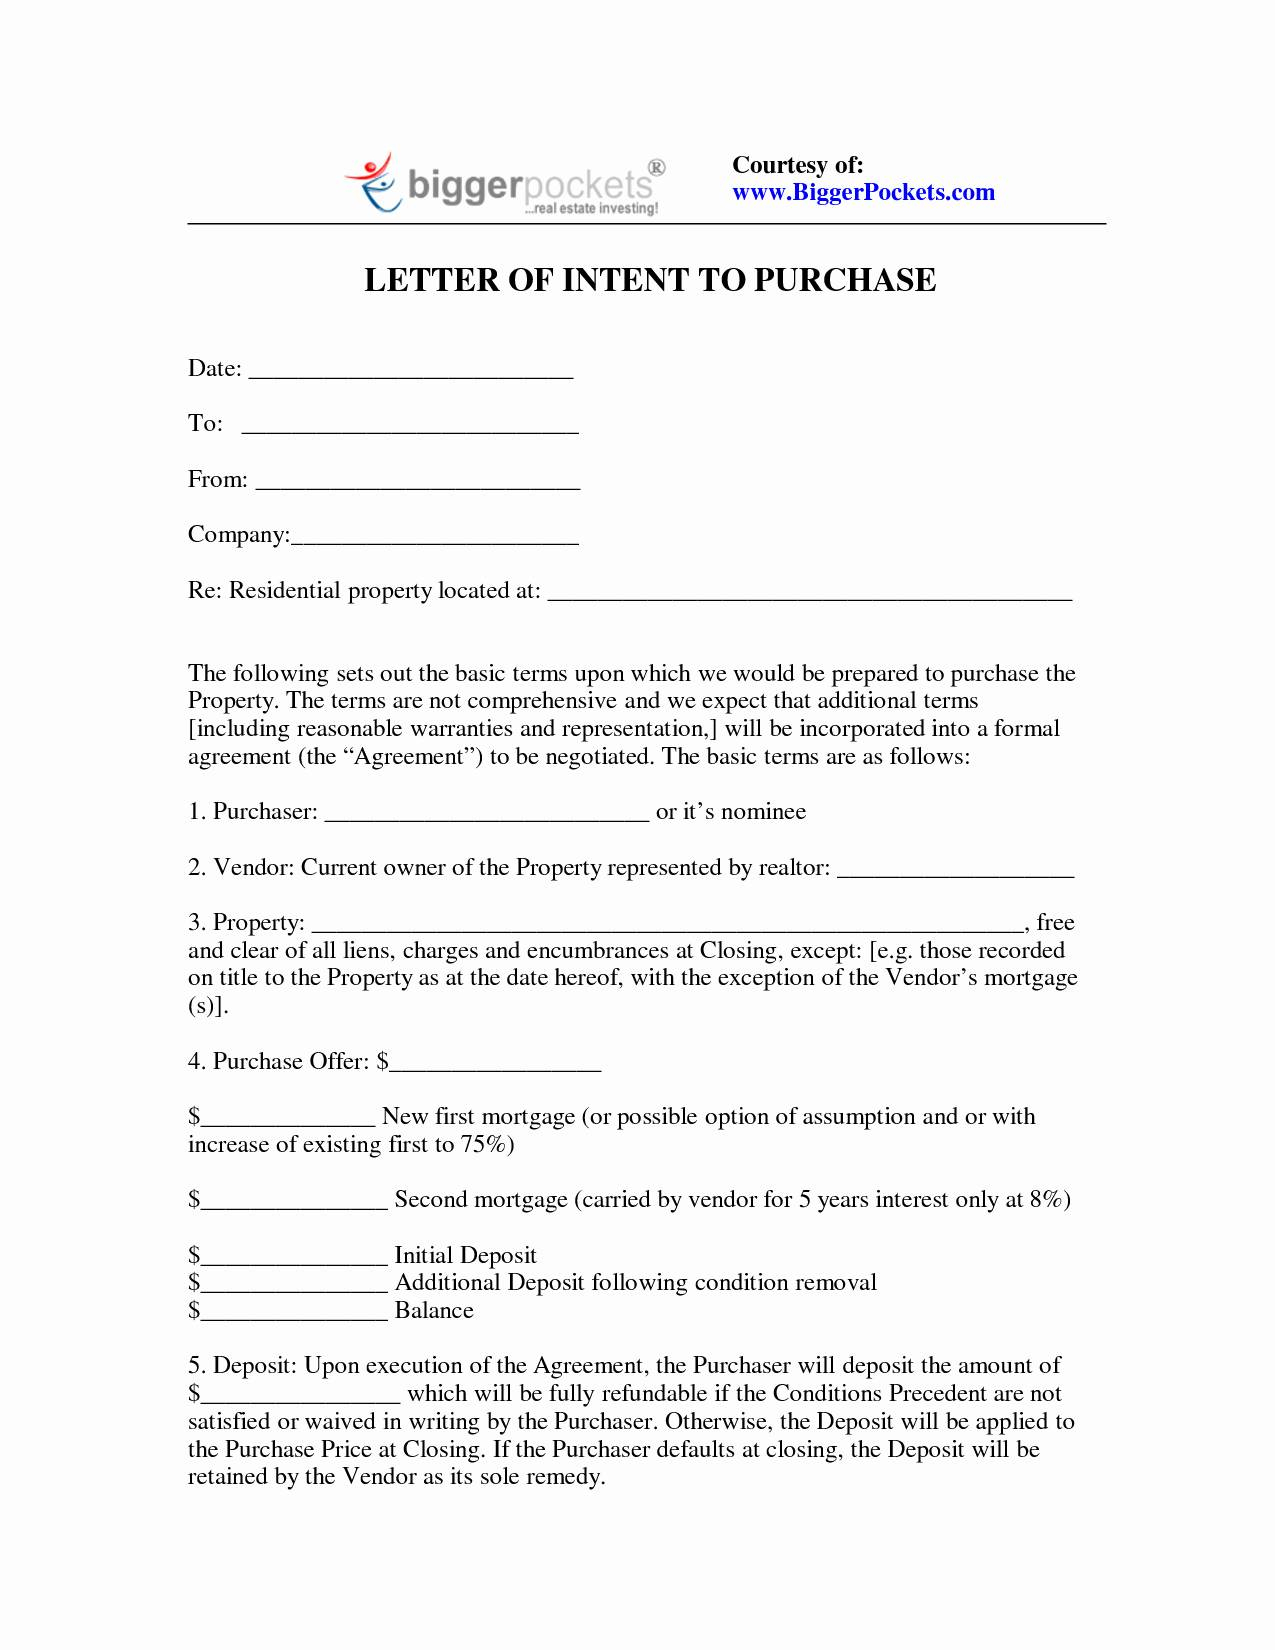 Letter Of Intent to Purchase Real Estate Template - Letter Intent to Purchase Property Template Elegant Letter Tent